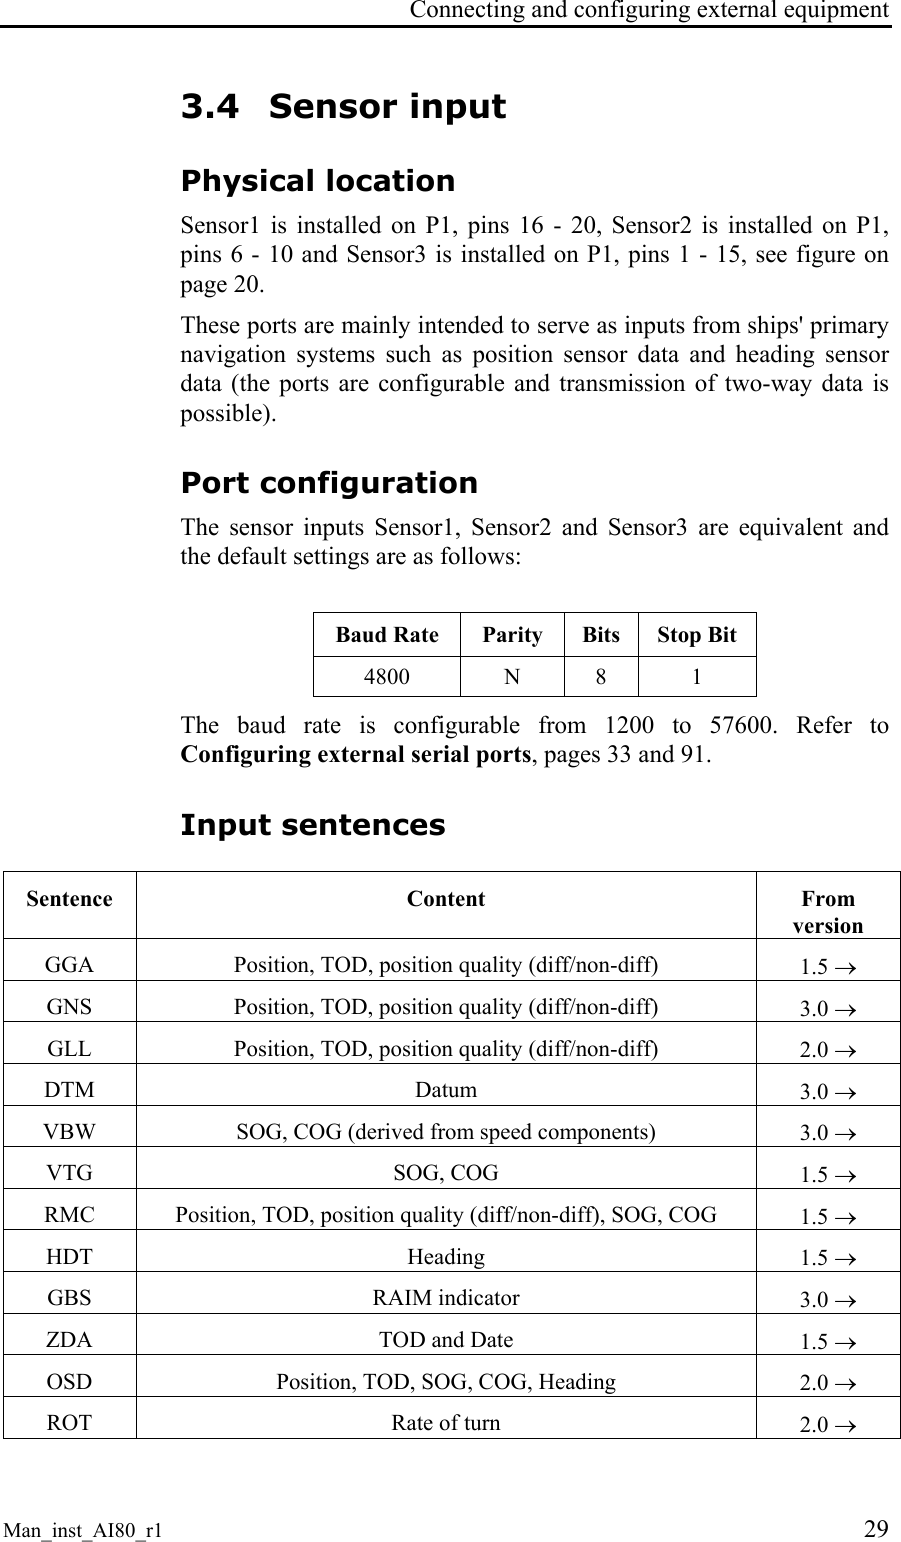 Connecting and configuring external equipment Man_inst_AI80_r1 29 3.4 Sensor input Physical location Sensor1 is installed on P1, pins 16 - 20, Sensor2 is installed on P1, pins 6 - 10 and Sensor3 is installed on P1, pins 1 - 15, see figure on page 20. These ports are mainly intended to serve as inputs from ships&apos; primary navigation systems such as position sensor data and heading sensor data (the ports are configurable and transmission of two-way data is possible). Port configuration The sensor inputs Sensor1, Sensor2 and Sensor3 are equivalent and the default settings are as follows:  Baud Rate  Parity  Bits  Stop Bit 4800 N 8 1 The baud rate is configurable from 1200 to 57600. Refer to Configuring external serial ports, pages 33 and 91. Input sentences    Sentence Content  From version GGA  Position, TOD, position quality (diff/non-diff)  1.5 → GNS  Position, TOD, position quality (diff/non-diff)  3.0 → GLL  Position, TOD, position quality (diff/non-diff)  2.0 → DTM Datum 3.0 → VBW  SOG, COG (derived from speed components)  3.0 → VTG SOG, COG 1.5 → RMC  Position, TOD, position quality (diff/non-diff), SOG, COG  1.5 → HDT Heading 1.5 → GBS RAIM indicator 3.0 → ZDA  TOD and Date  1.5 → OSD  Position, TOD, SOG, COG, Heading  2.0 → ROT  Rate of turn  2.0 → 